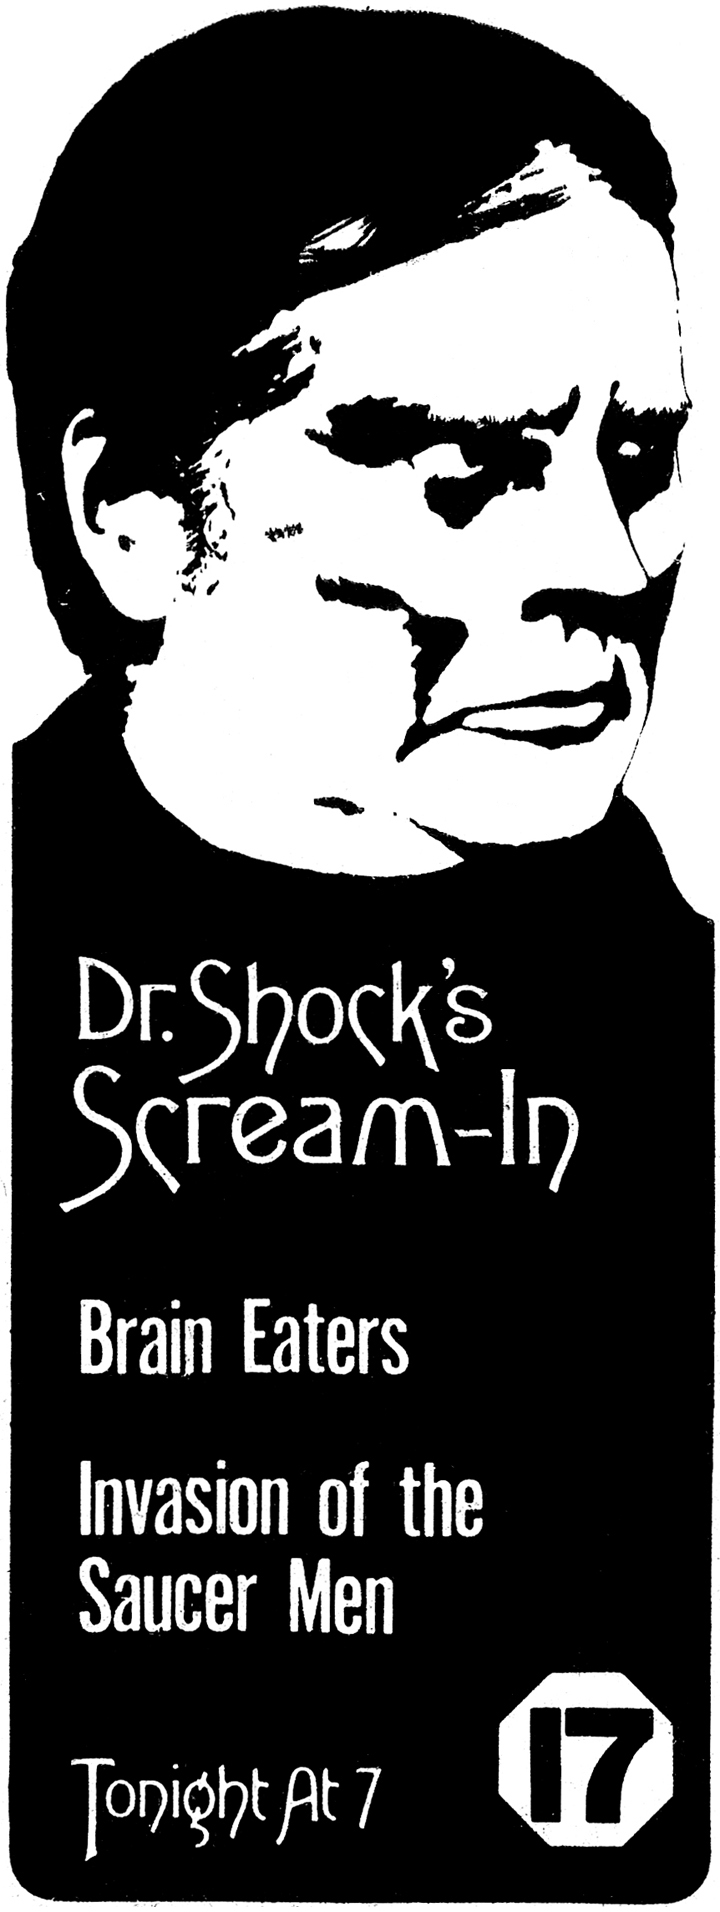 Dr. Shock (a.k.a. Joseph Zawislak) was remembered in my lecture.